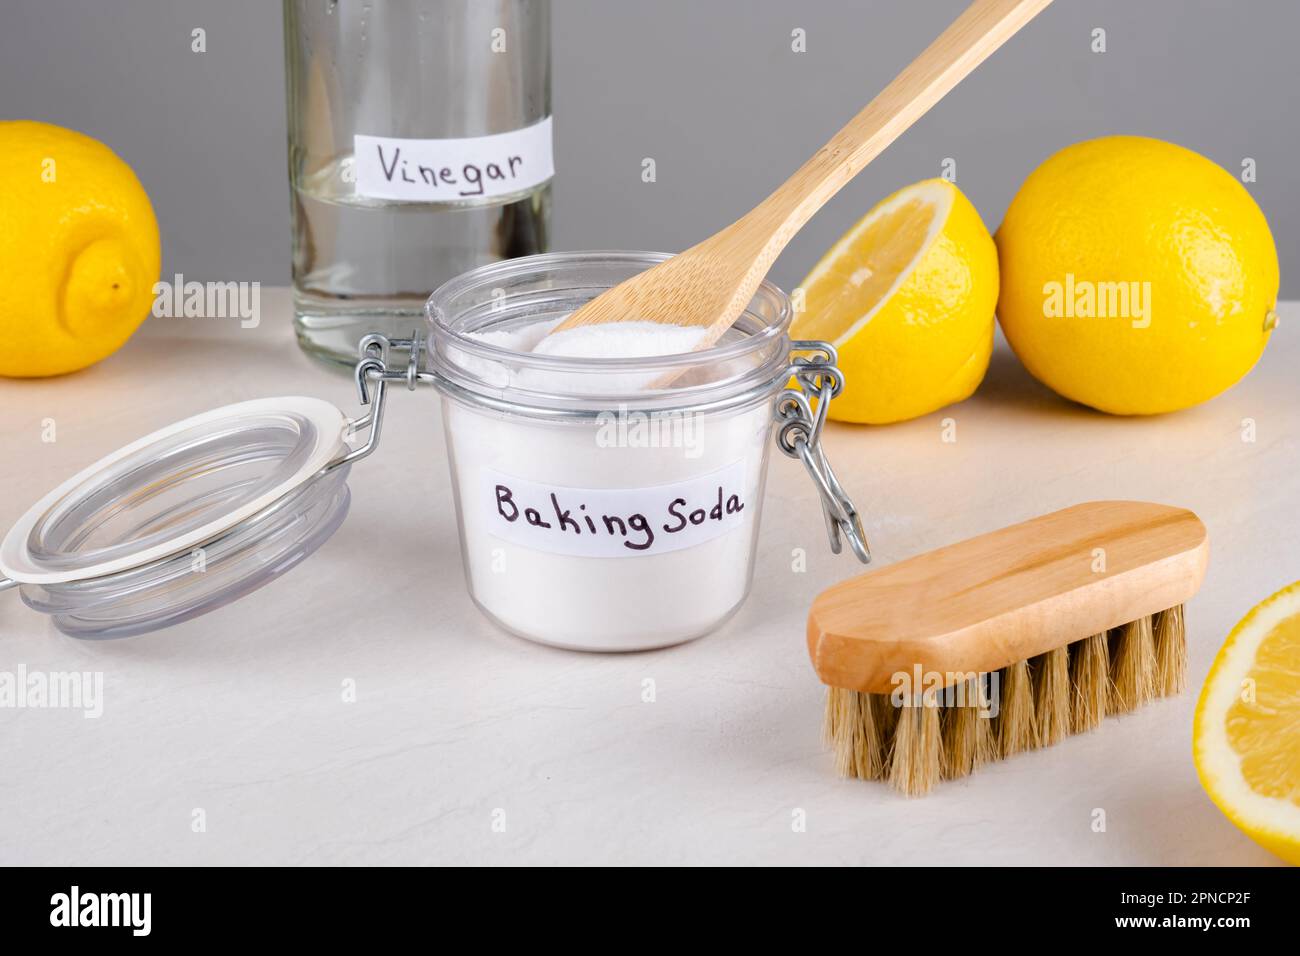 Baking soda, vinegar and lemon on a gray background.The concept ecological cleaning, disinfecting, removing stains Stock Photo